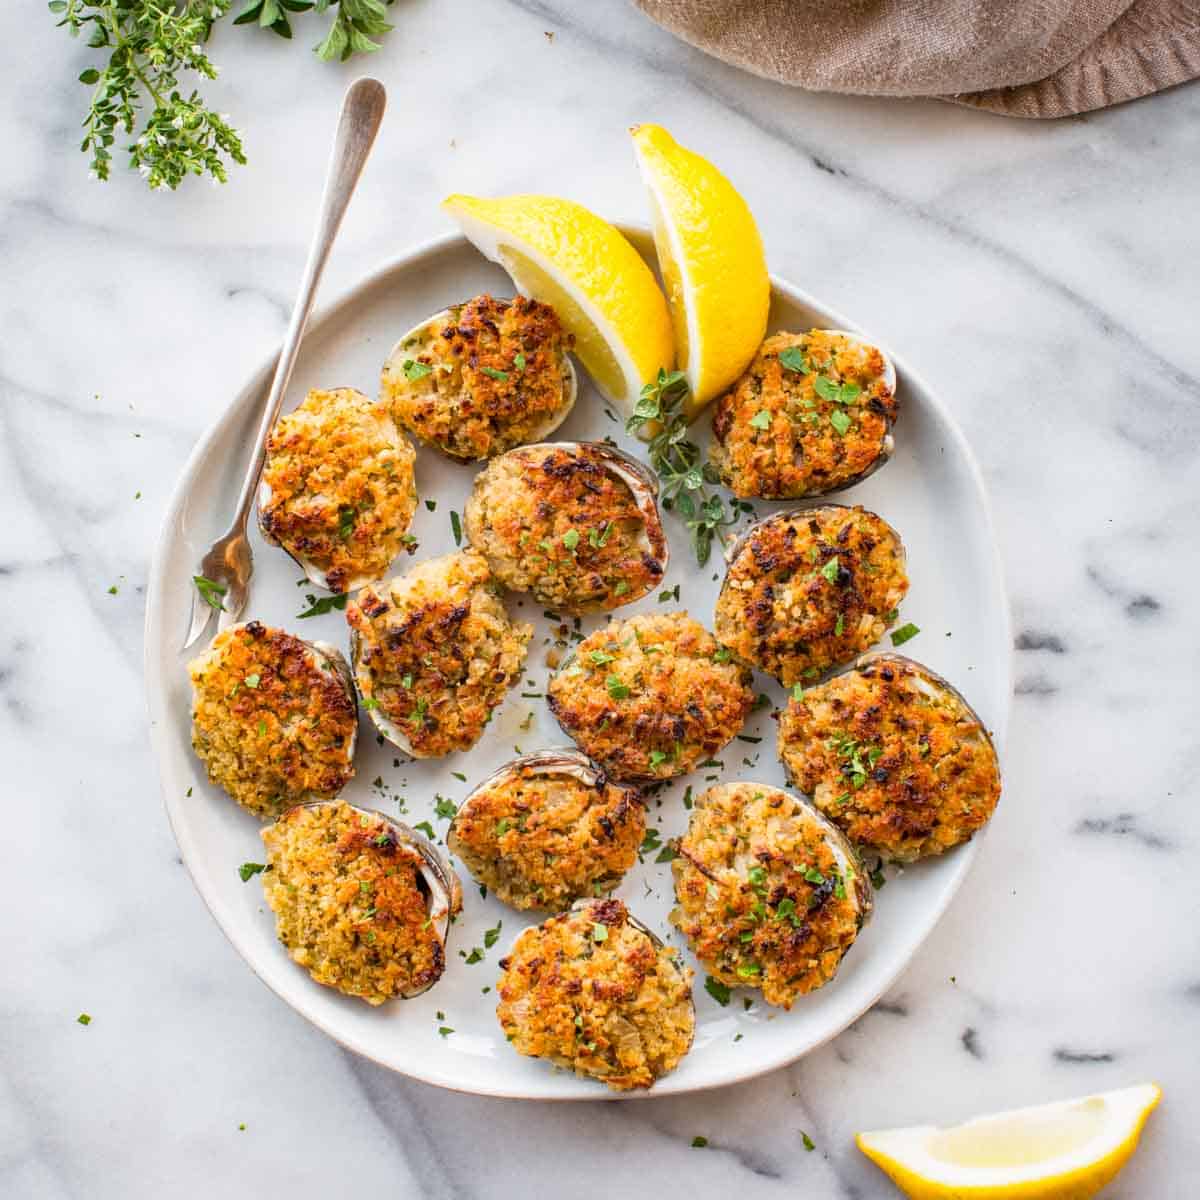 Stuffed Clams Recipe - Cooking with Cocktail Rings